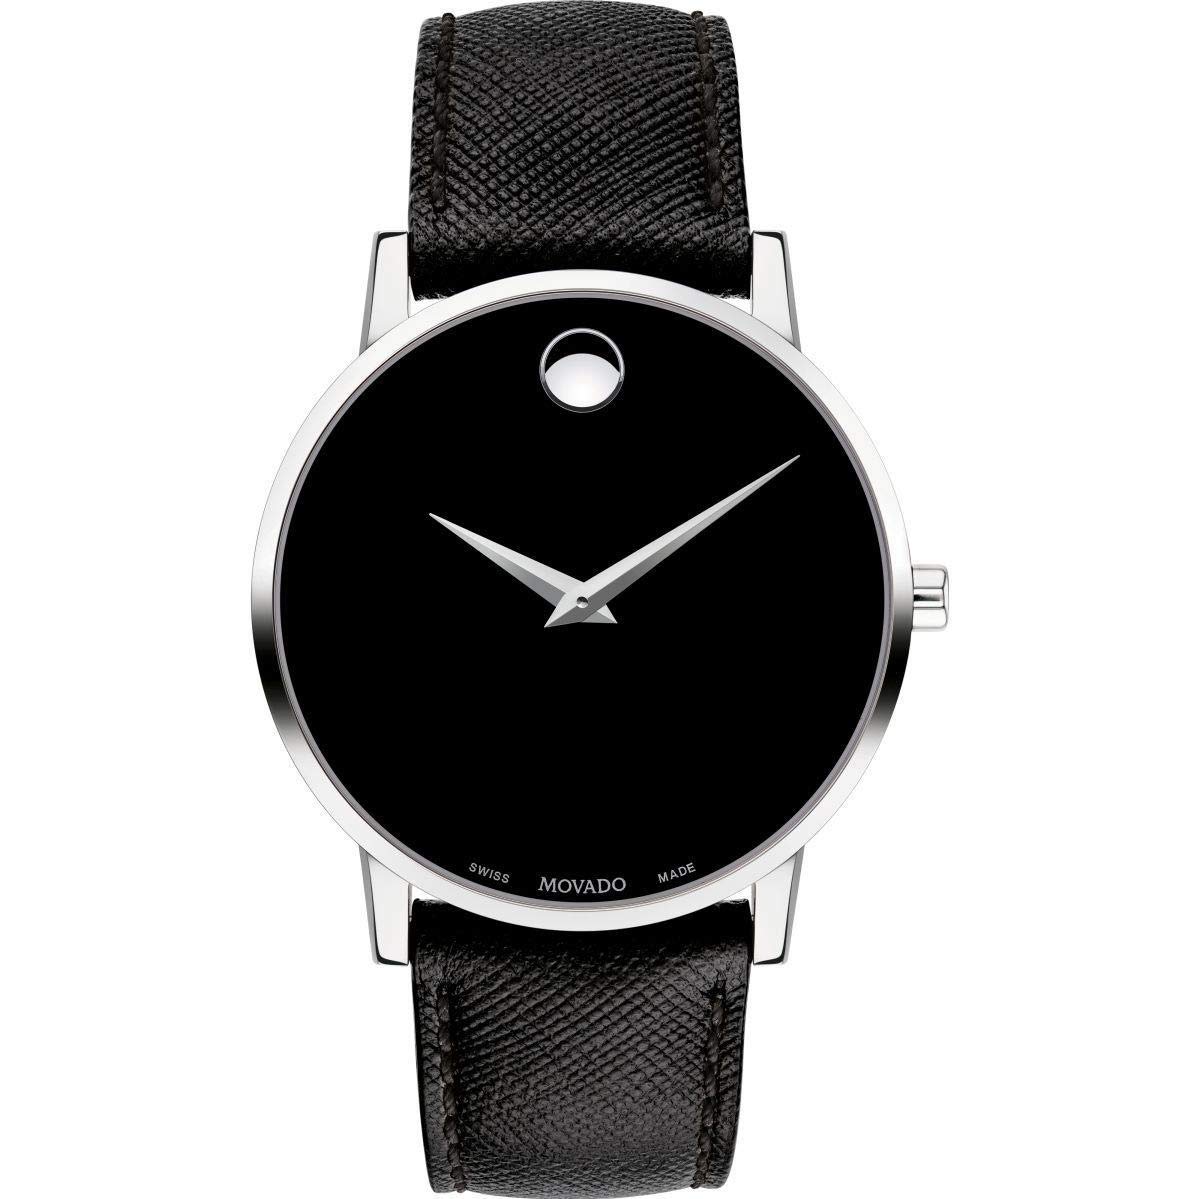 nicest leather watches - Movado Museum